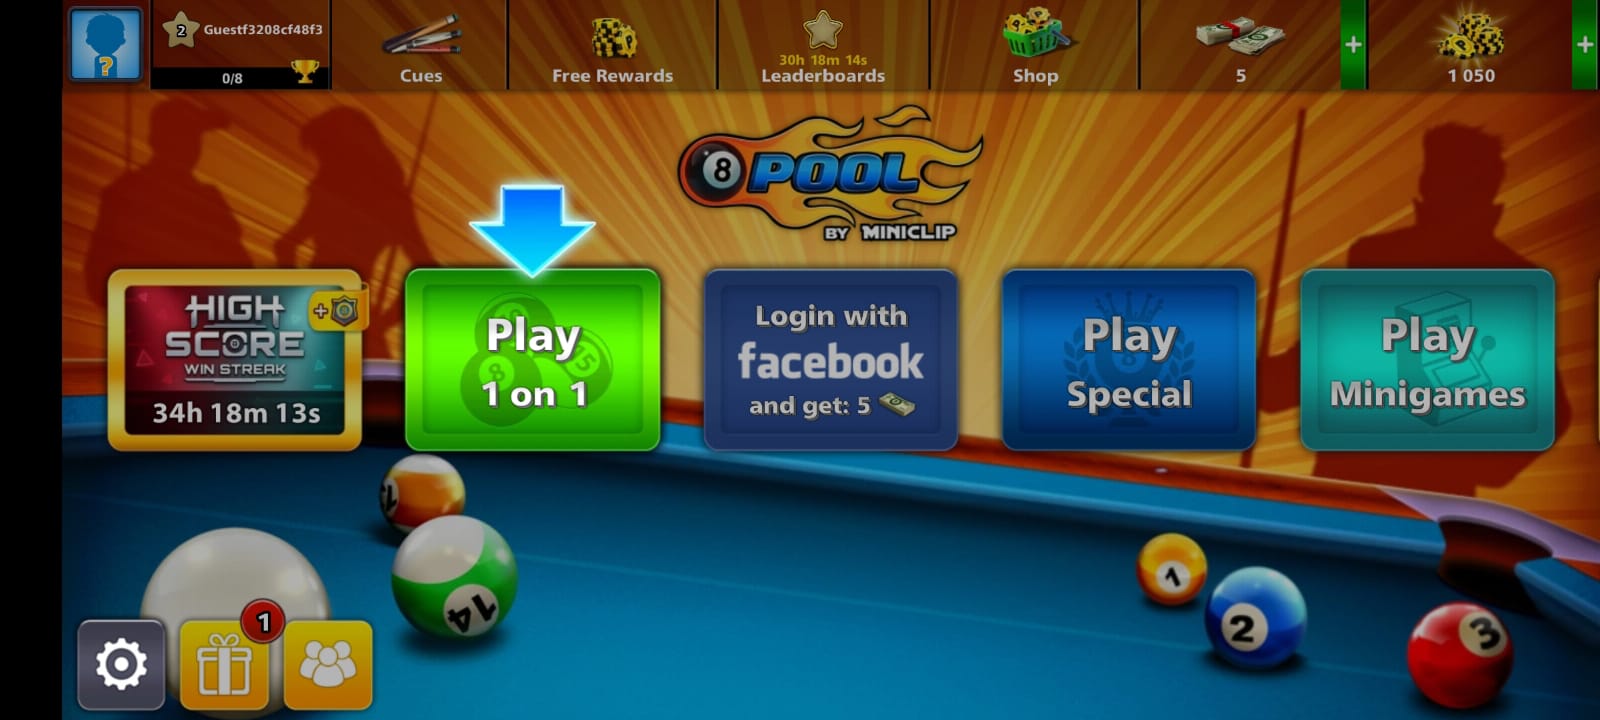 8 Ball Pool MOD APK v5.14.7 (Long Lines) for Android